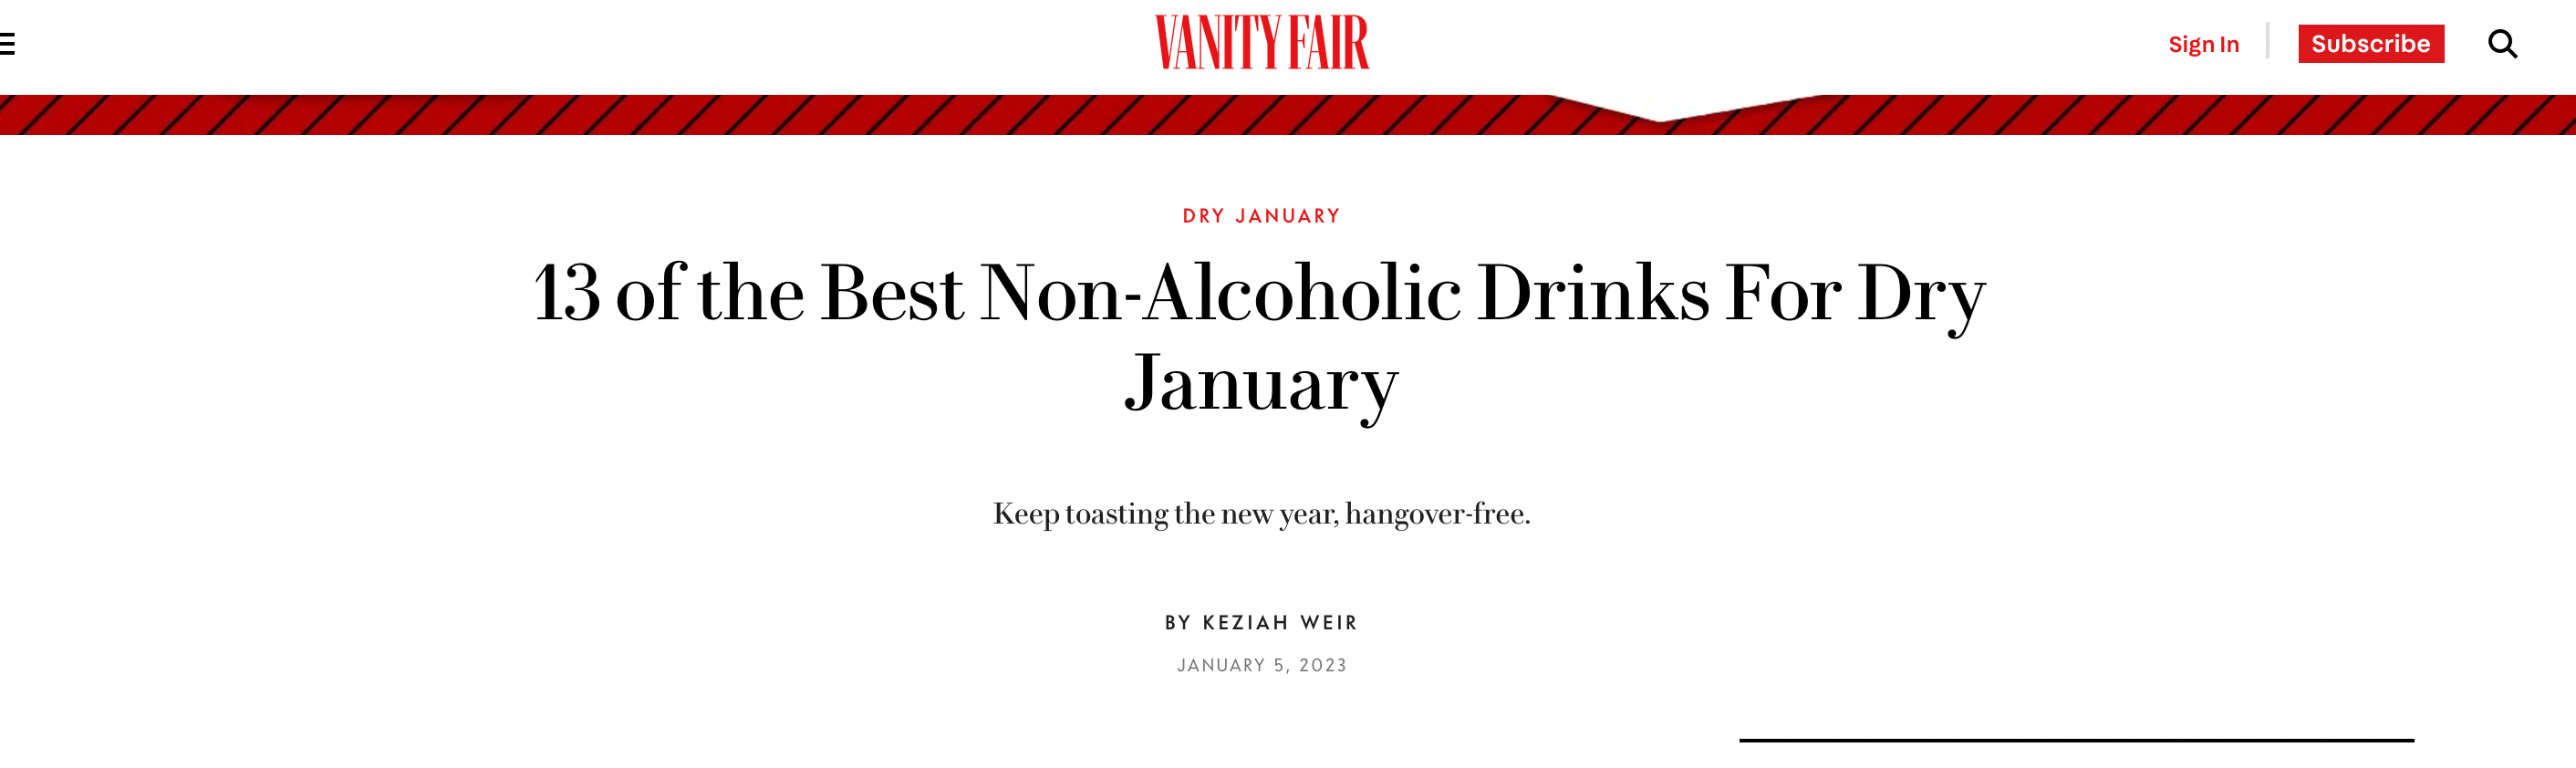 13 of the Best Non-Alcoholic Drinks For Dry January